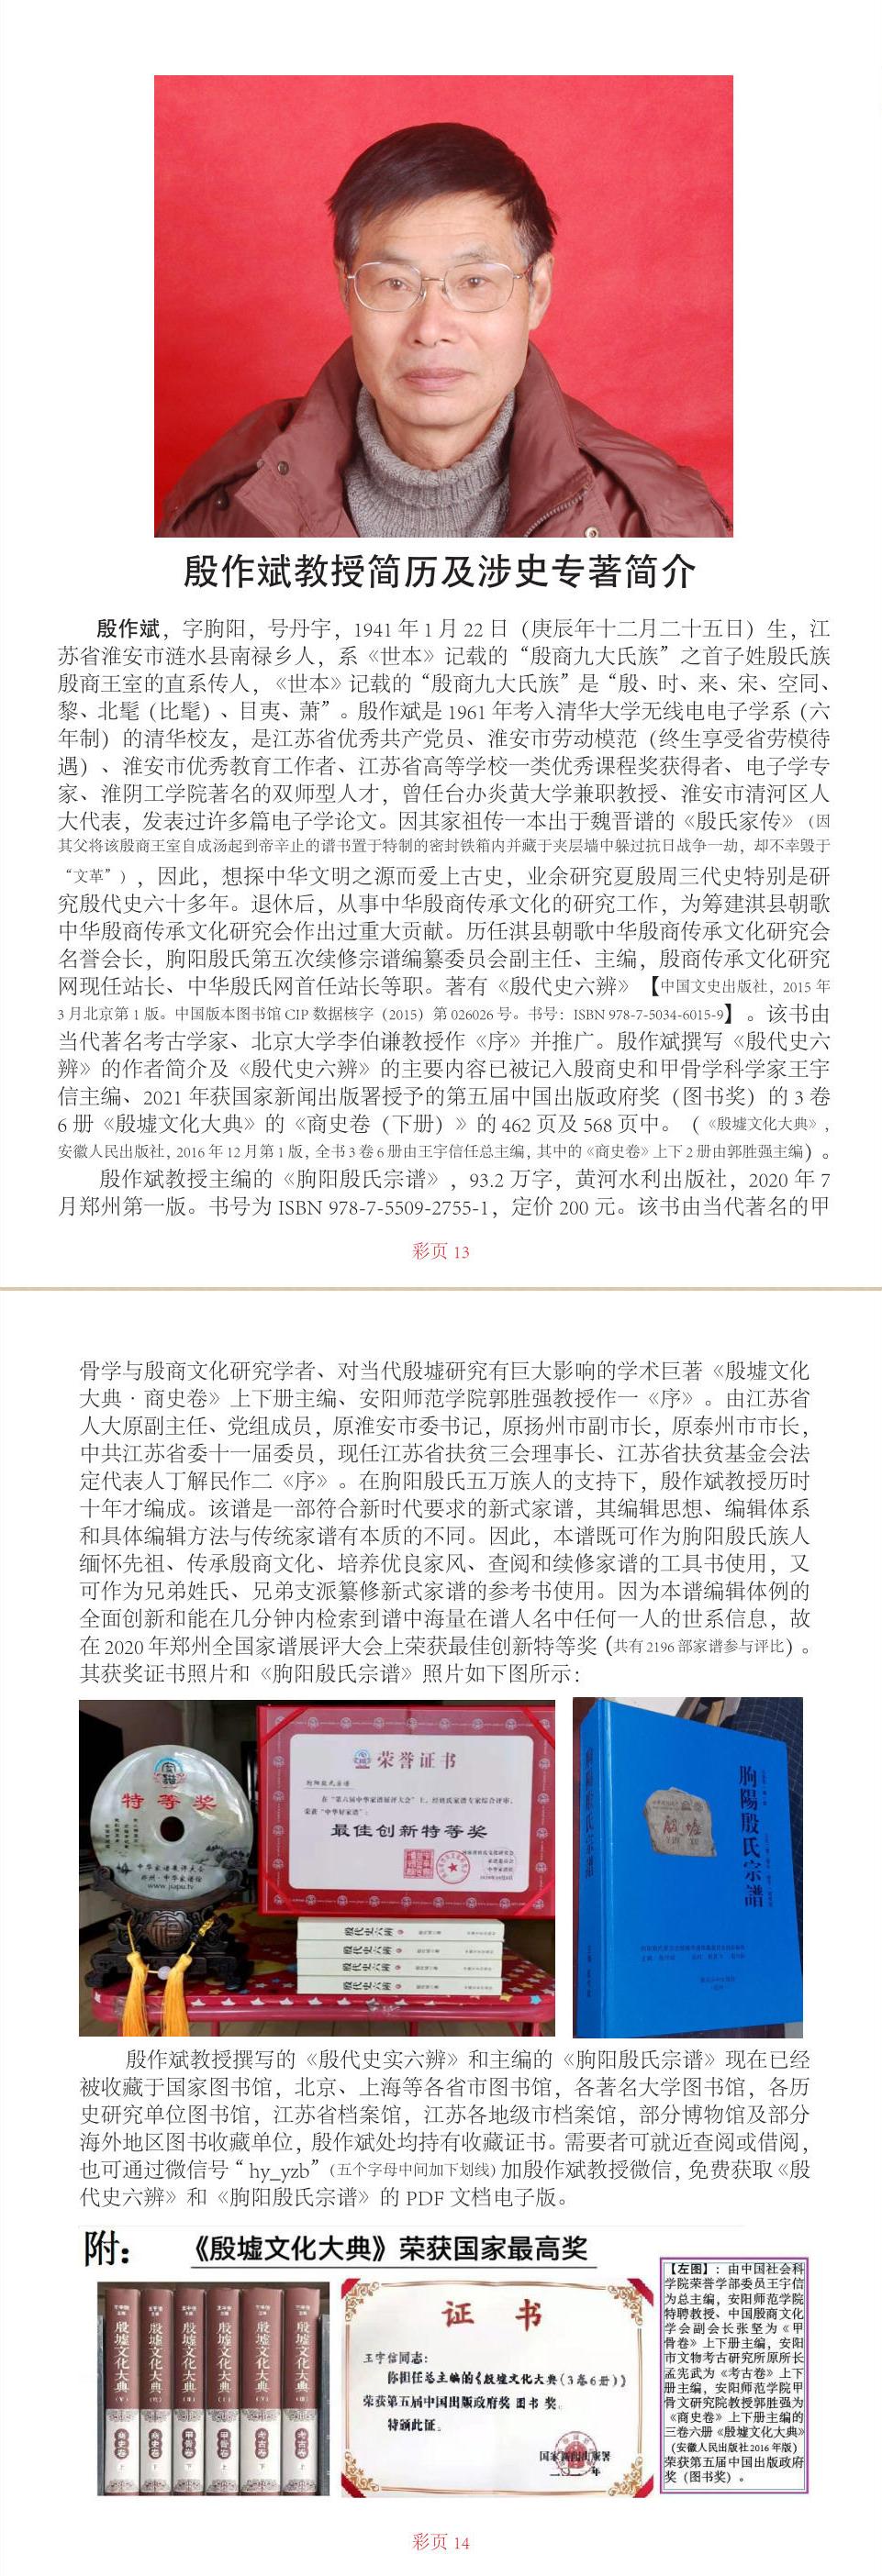 <span style='color:#FF0000;font-size:16px;font-style:none;font-weight:bold;text-decoration:none'>3_《殷代史》之三 :作者简介</span>